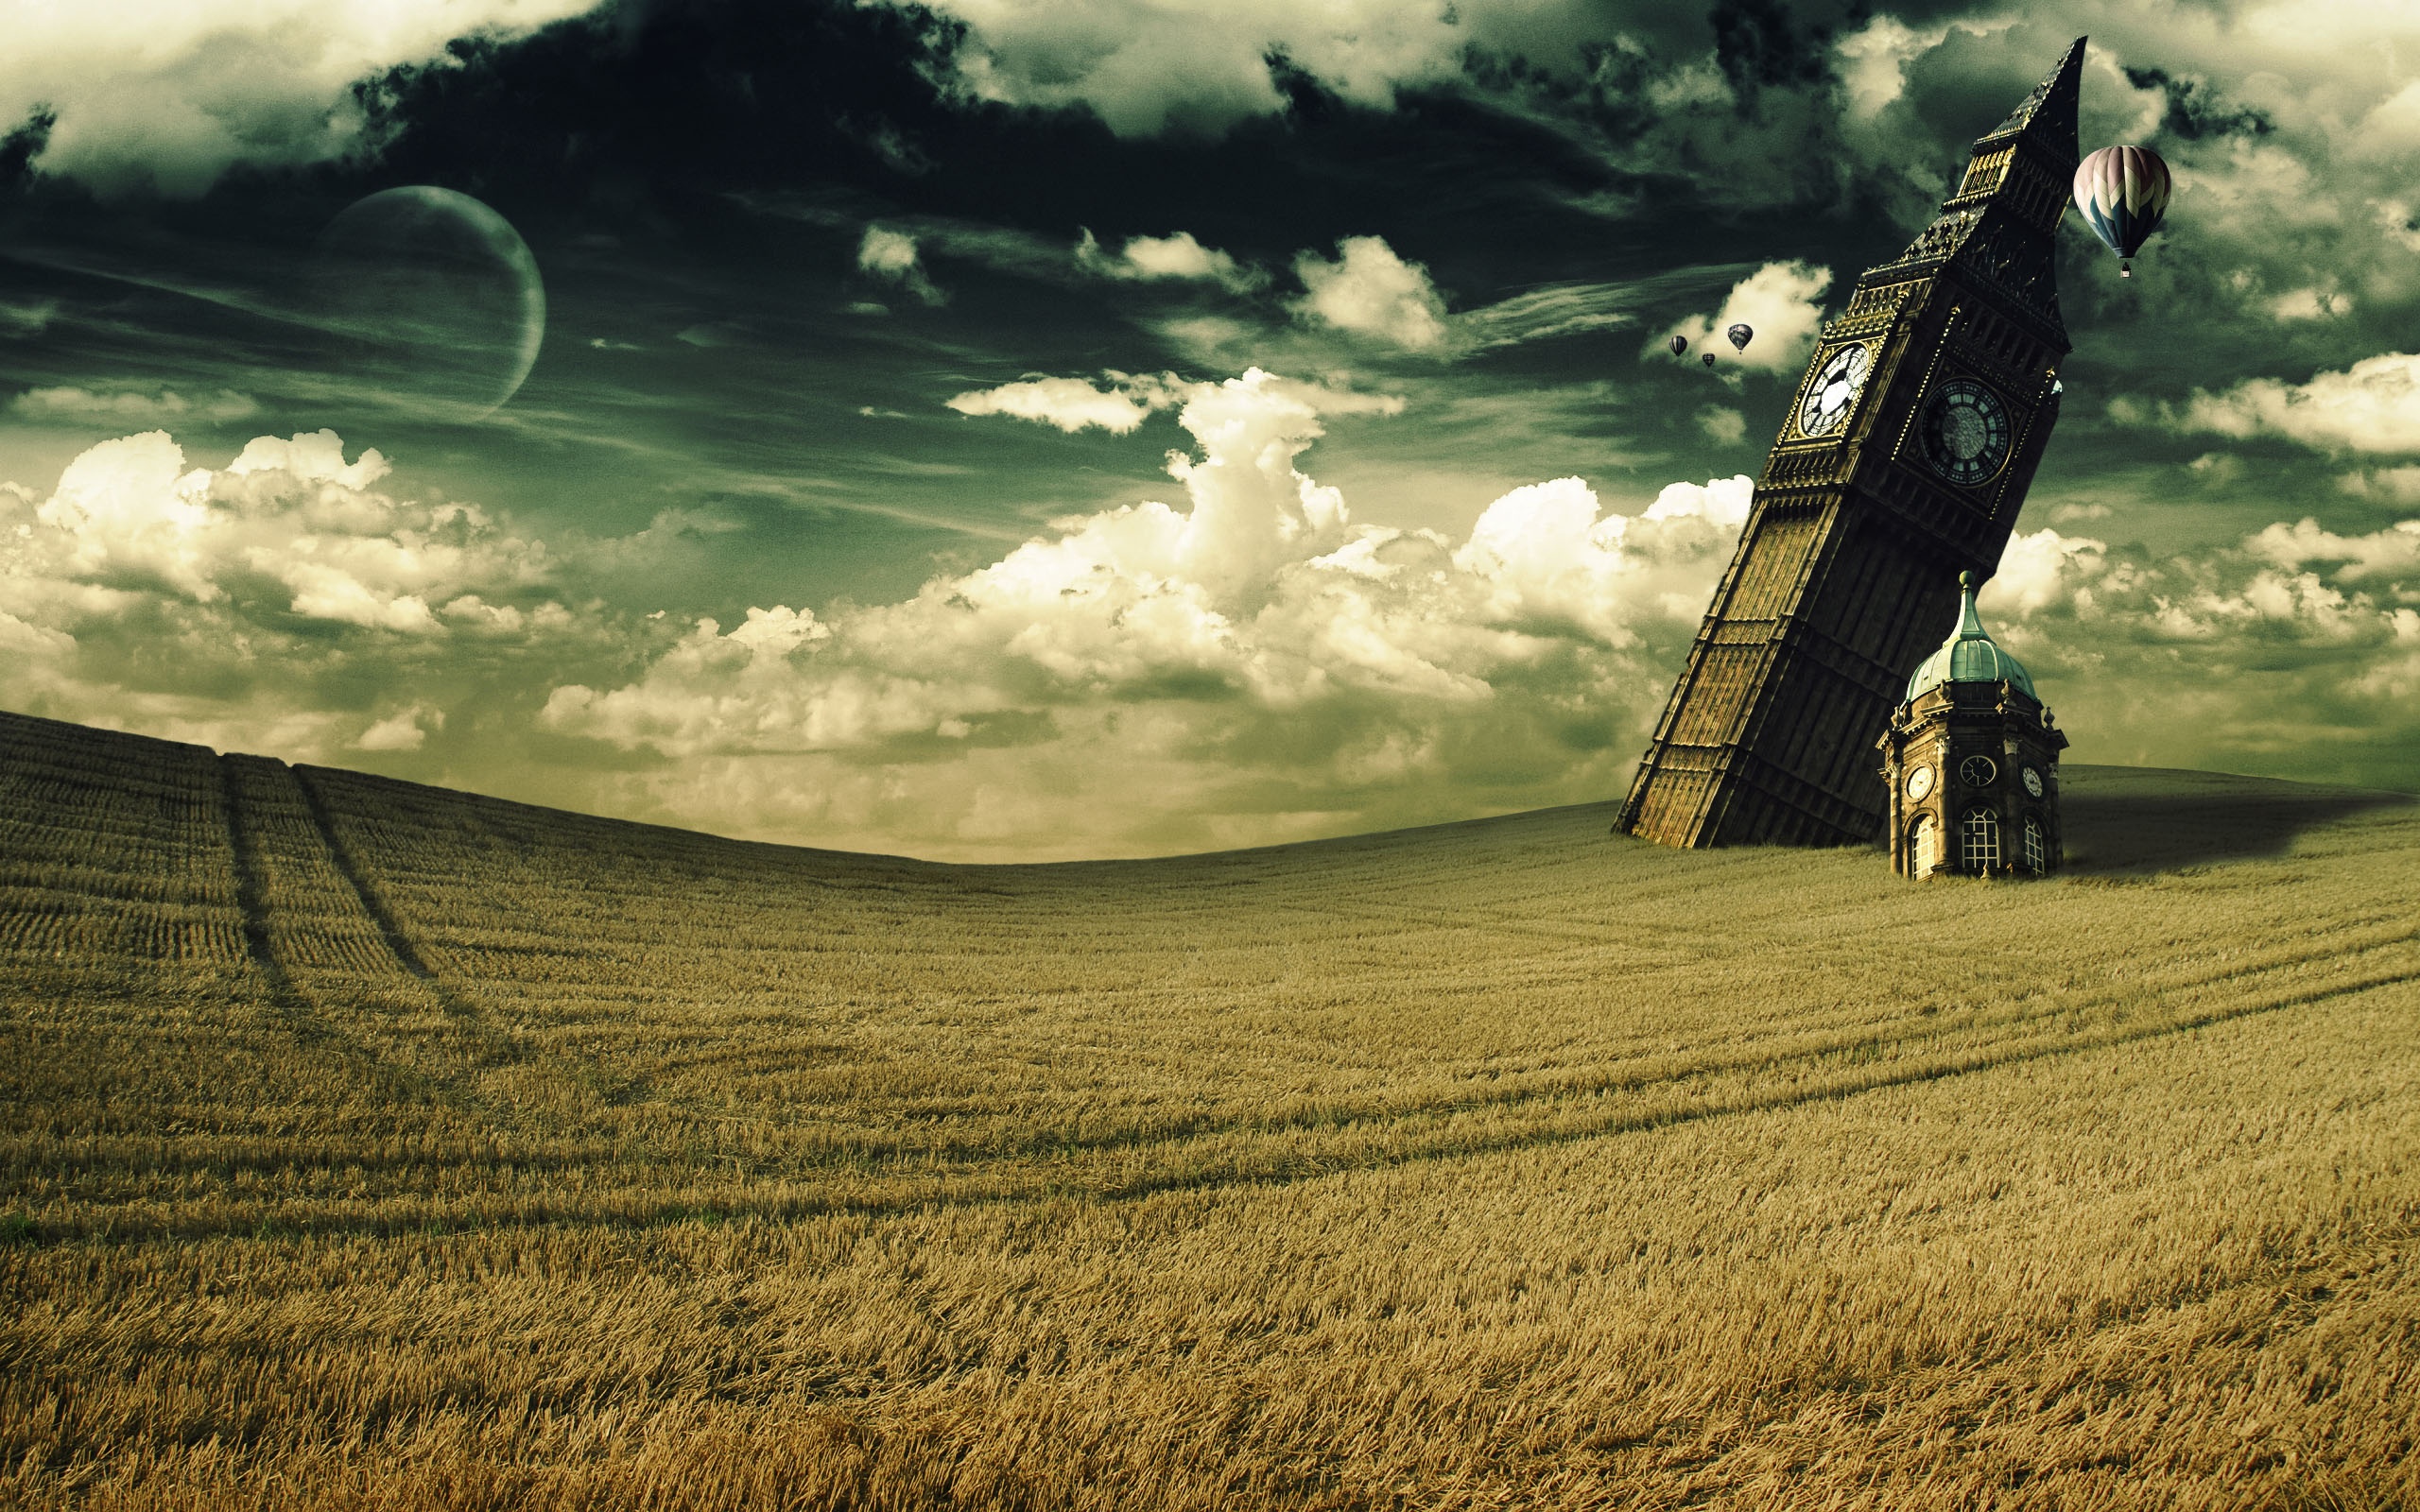 Surreal HD Wallpaper | Background Image | 2560x1600 | ID ...